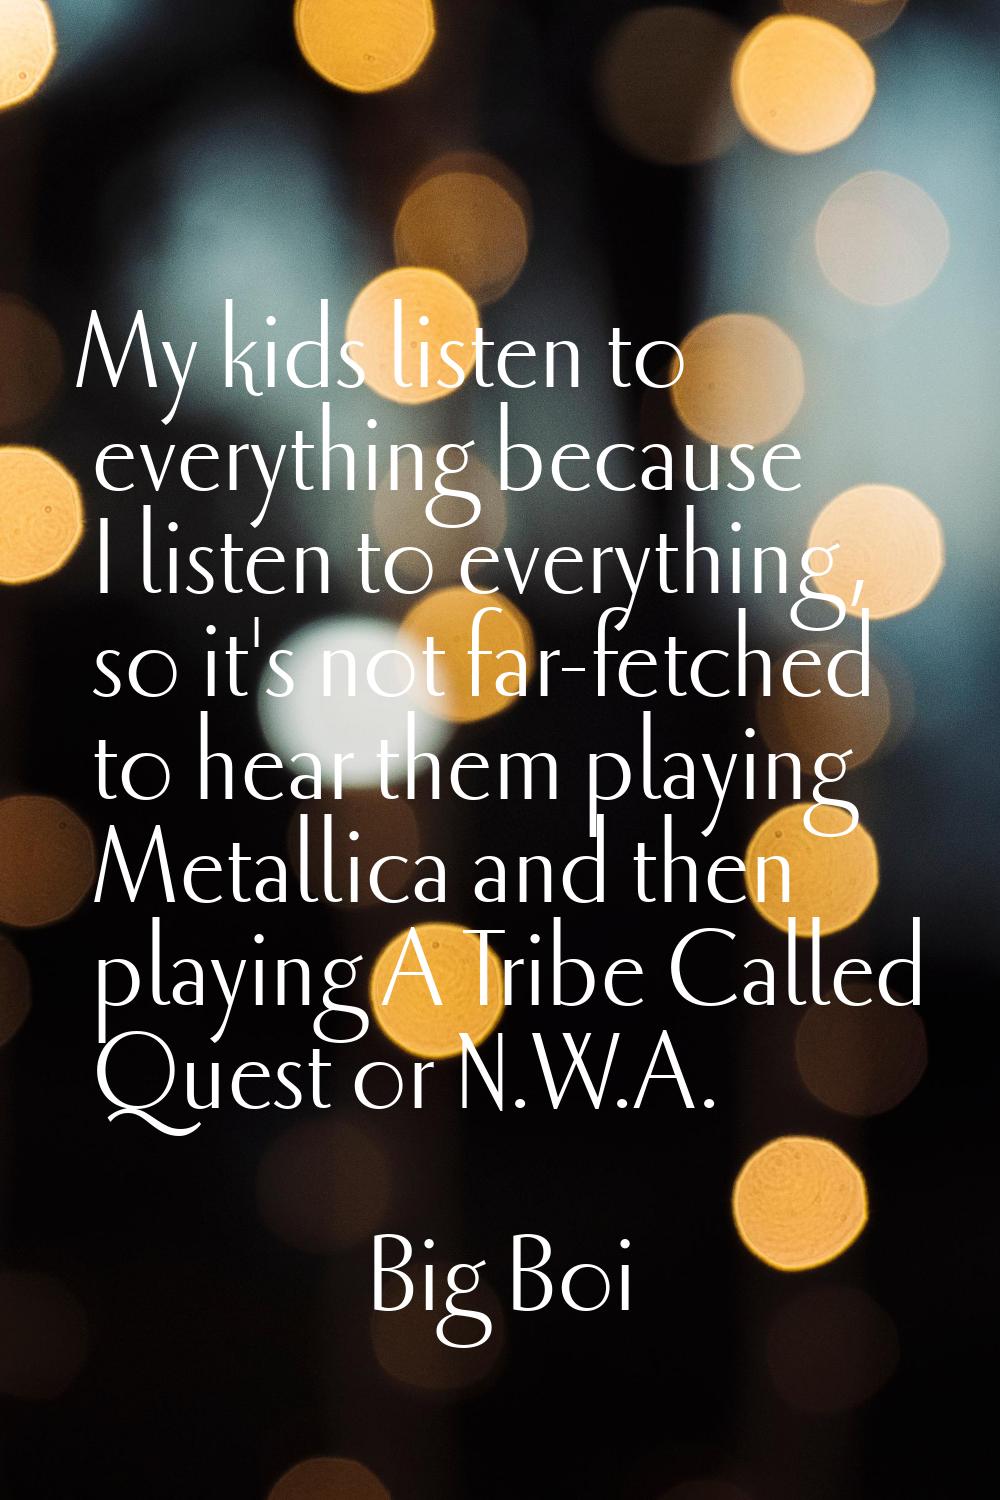 My kids listen to everything because I listen to everything, so it's not far-fetched to hear them p